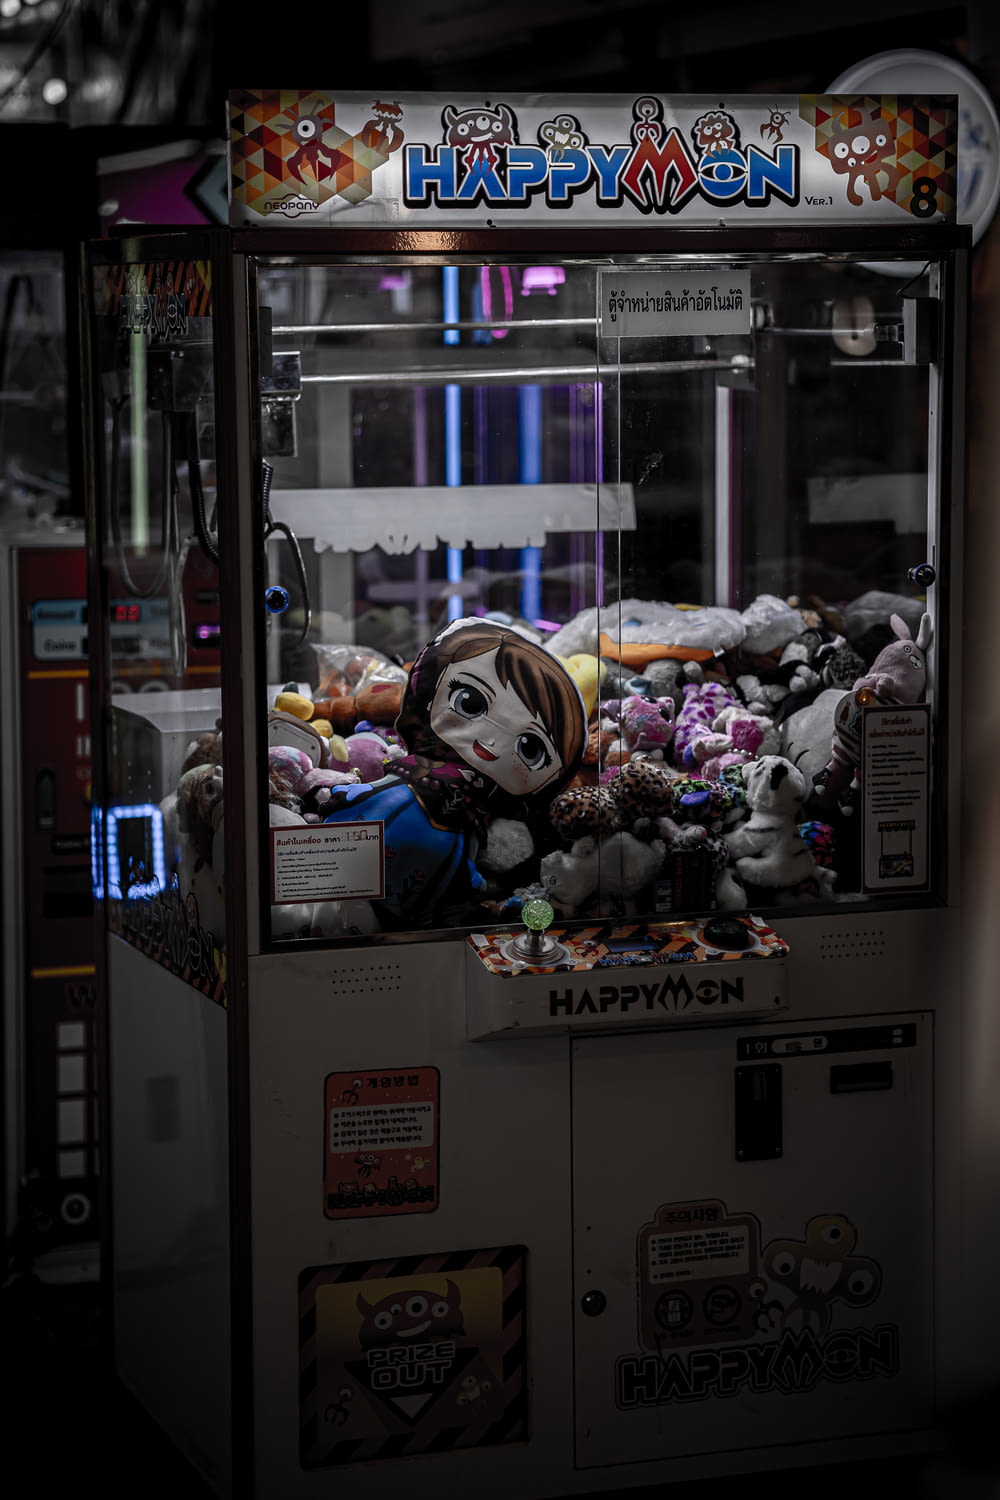 a machine with a stuffed animal inside of it